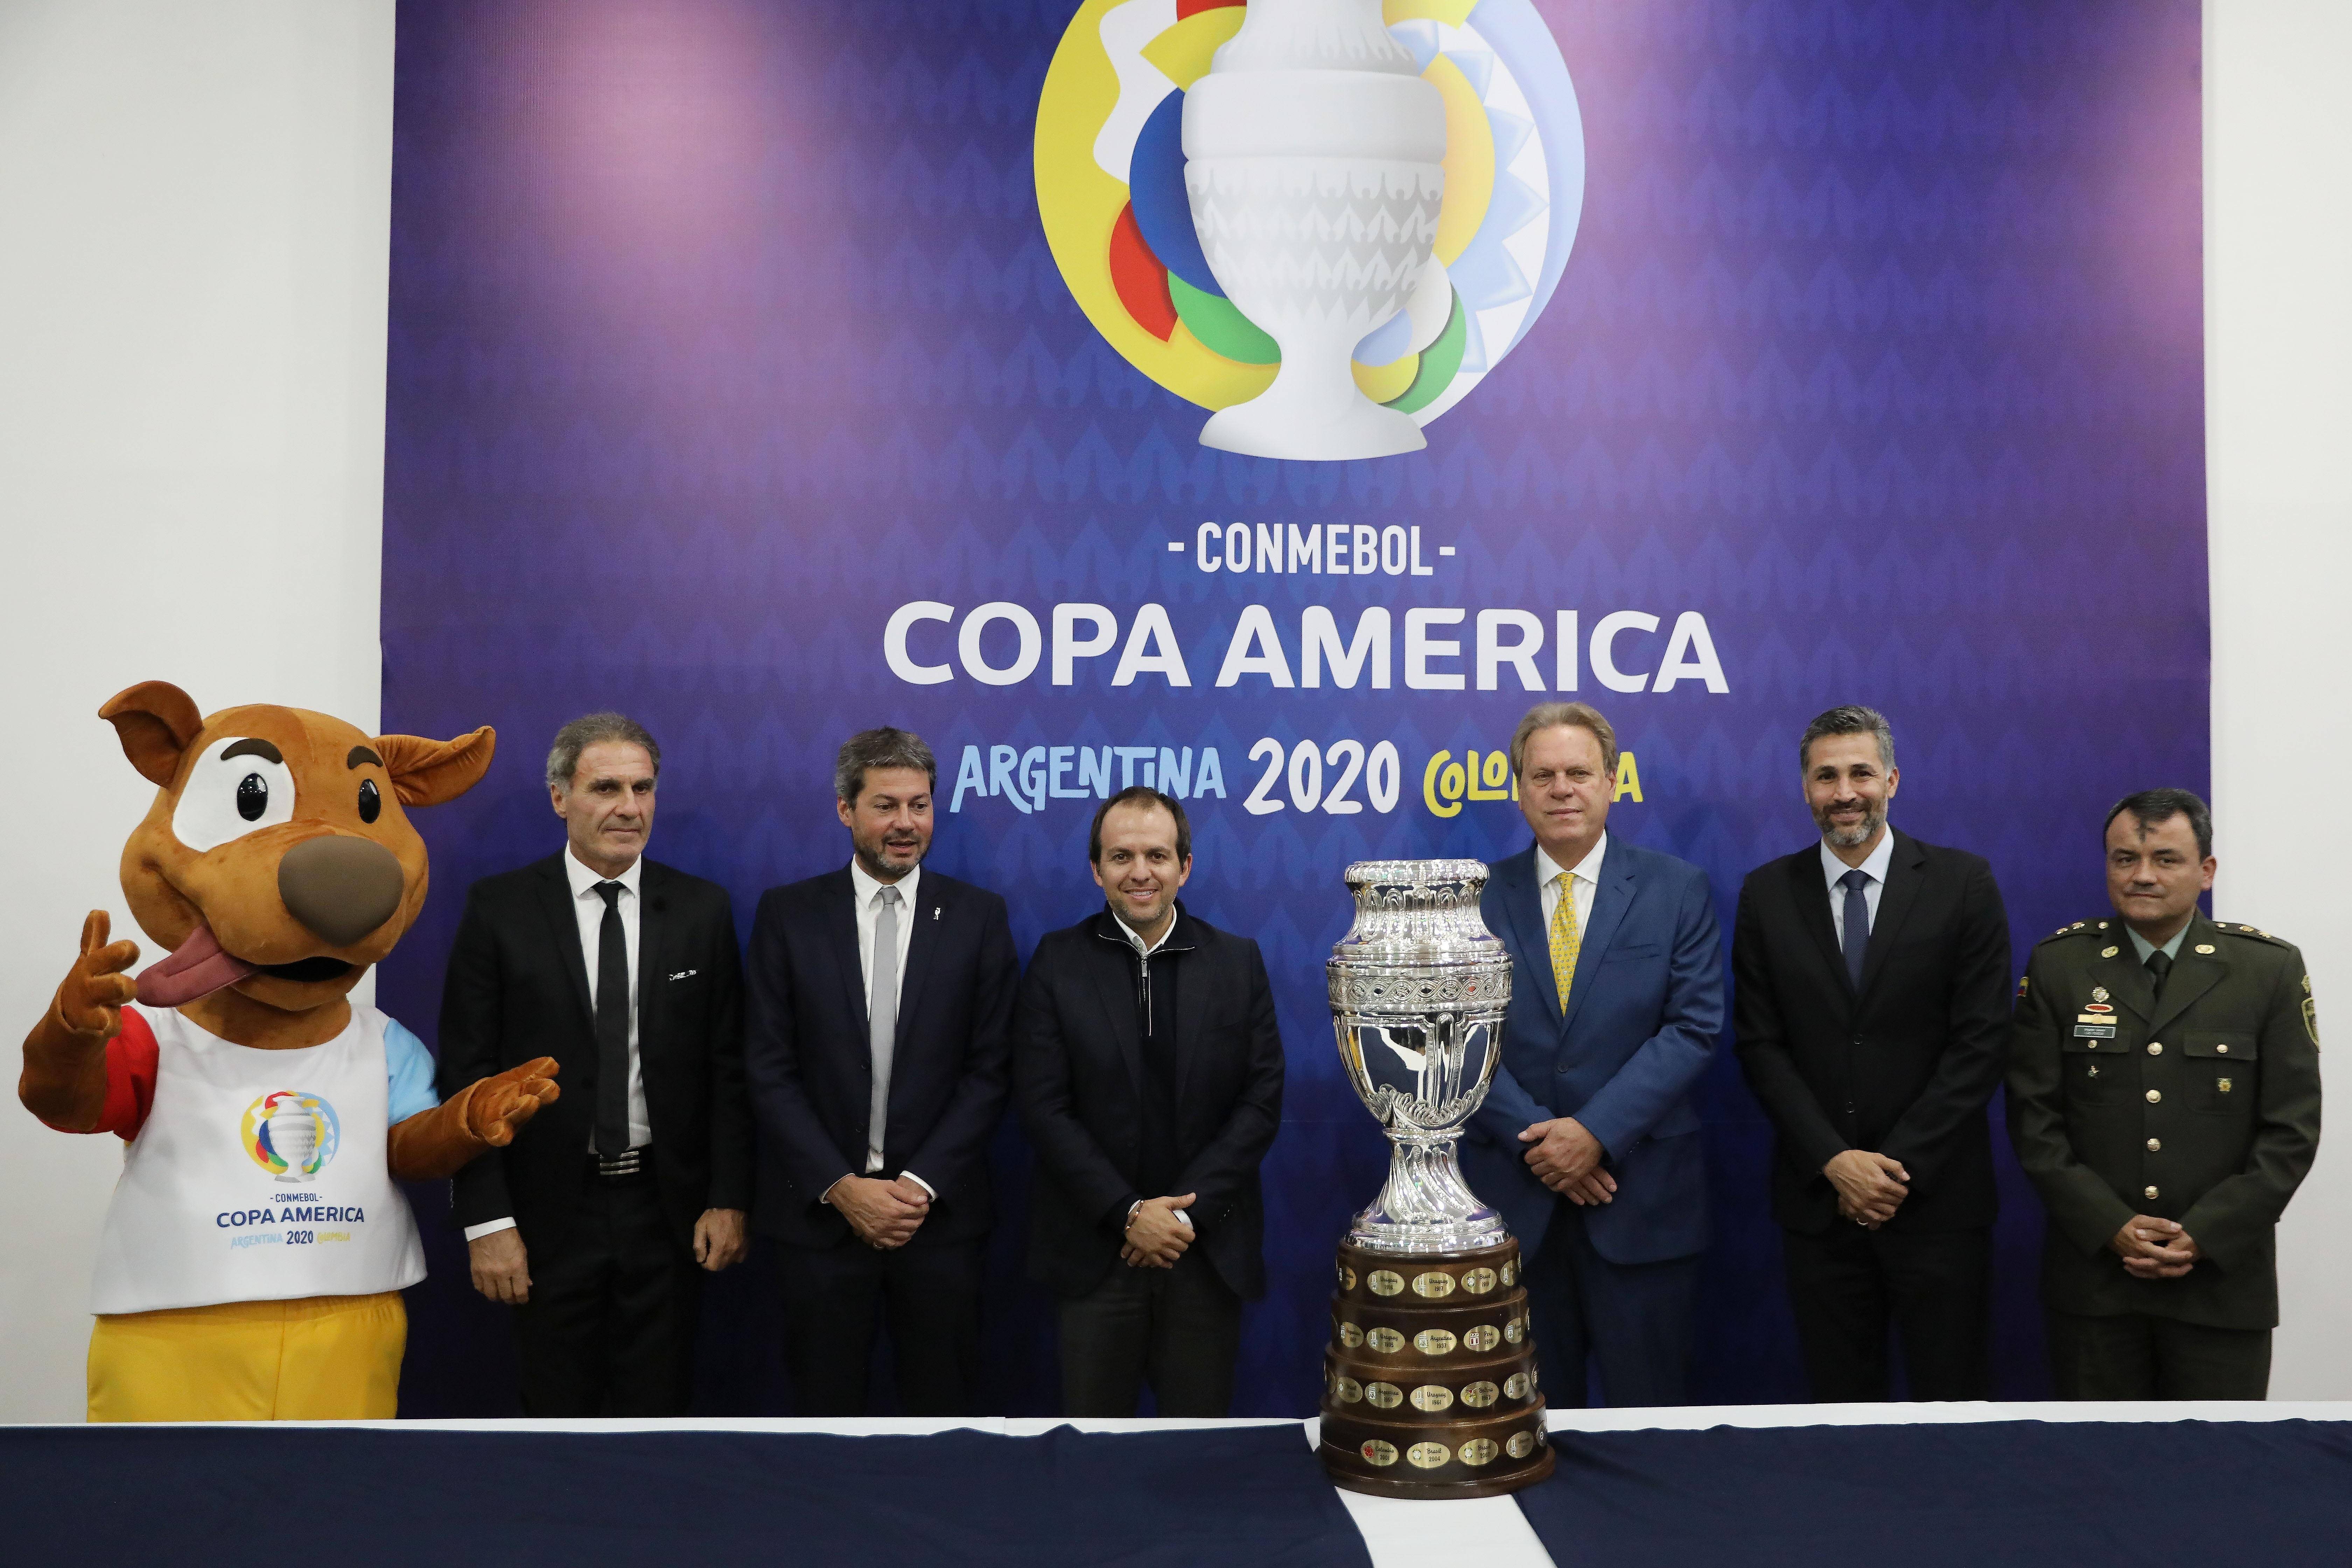 (left To Right) The Mascot Of The Copa America 2020; The Former Captain Of The Argentine Soccer Team Oscar Ruggeri; The